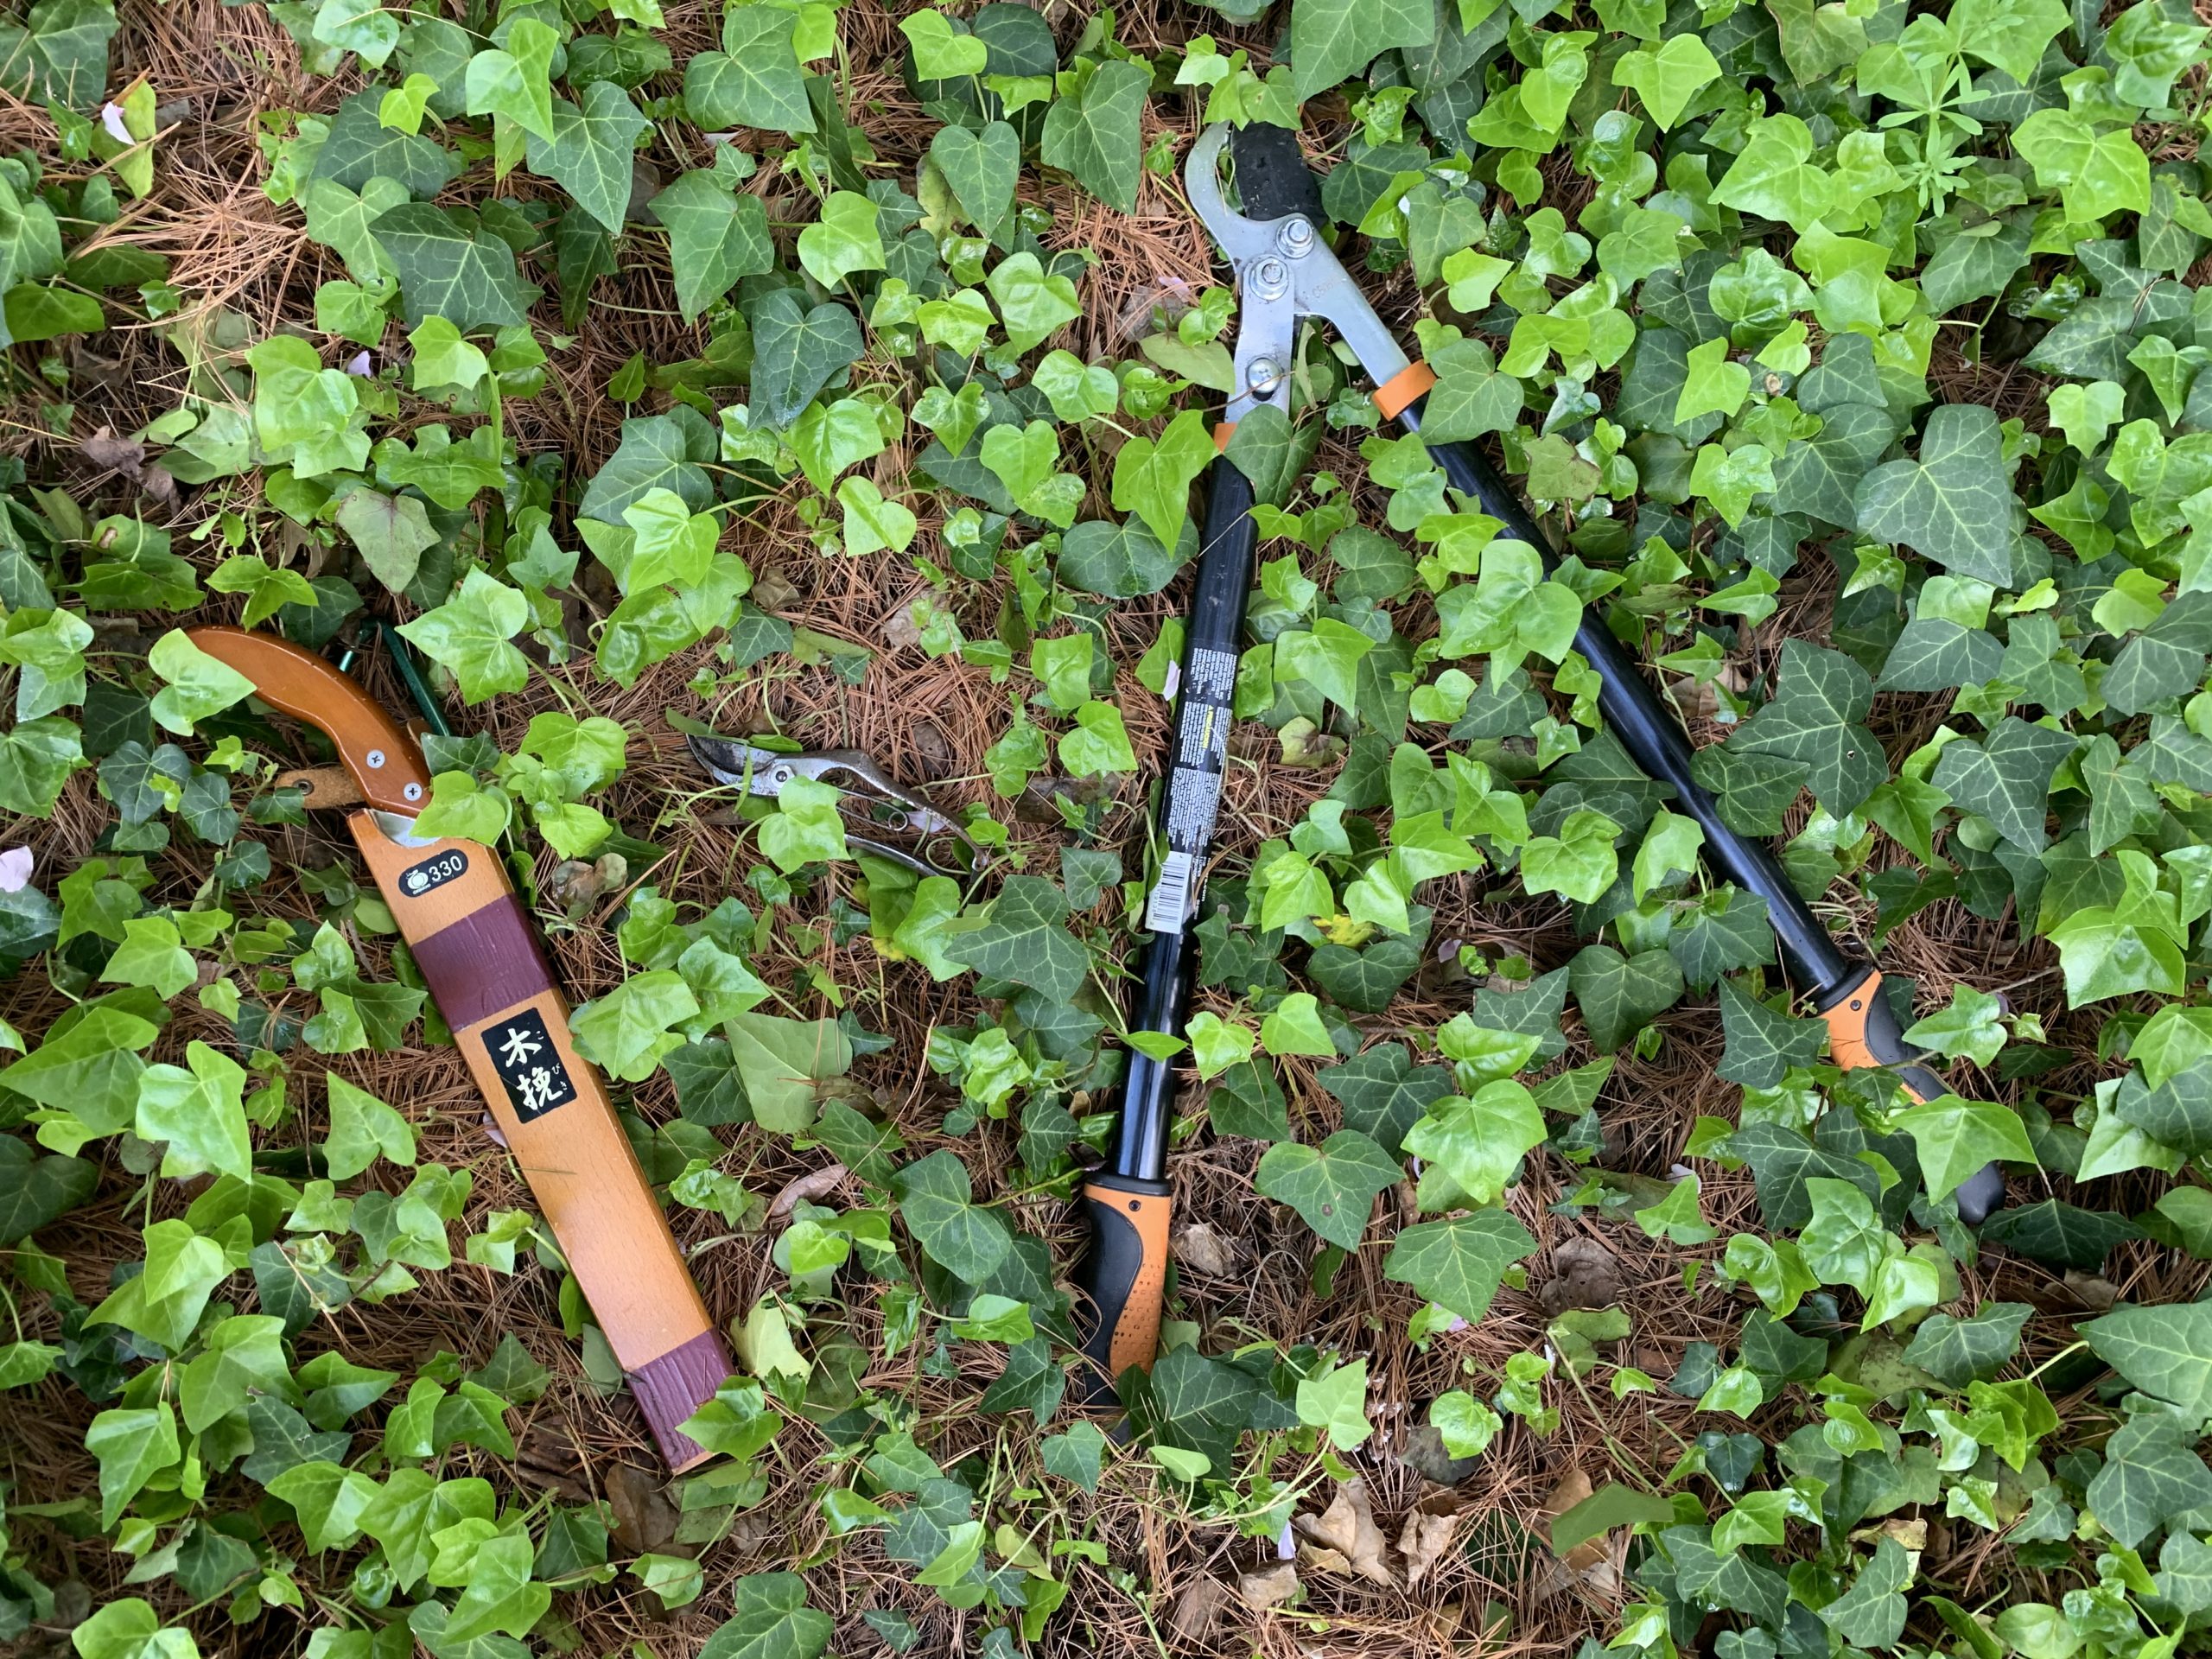 several garden tools are laying on the ground